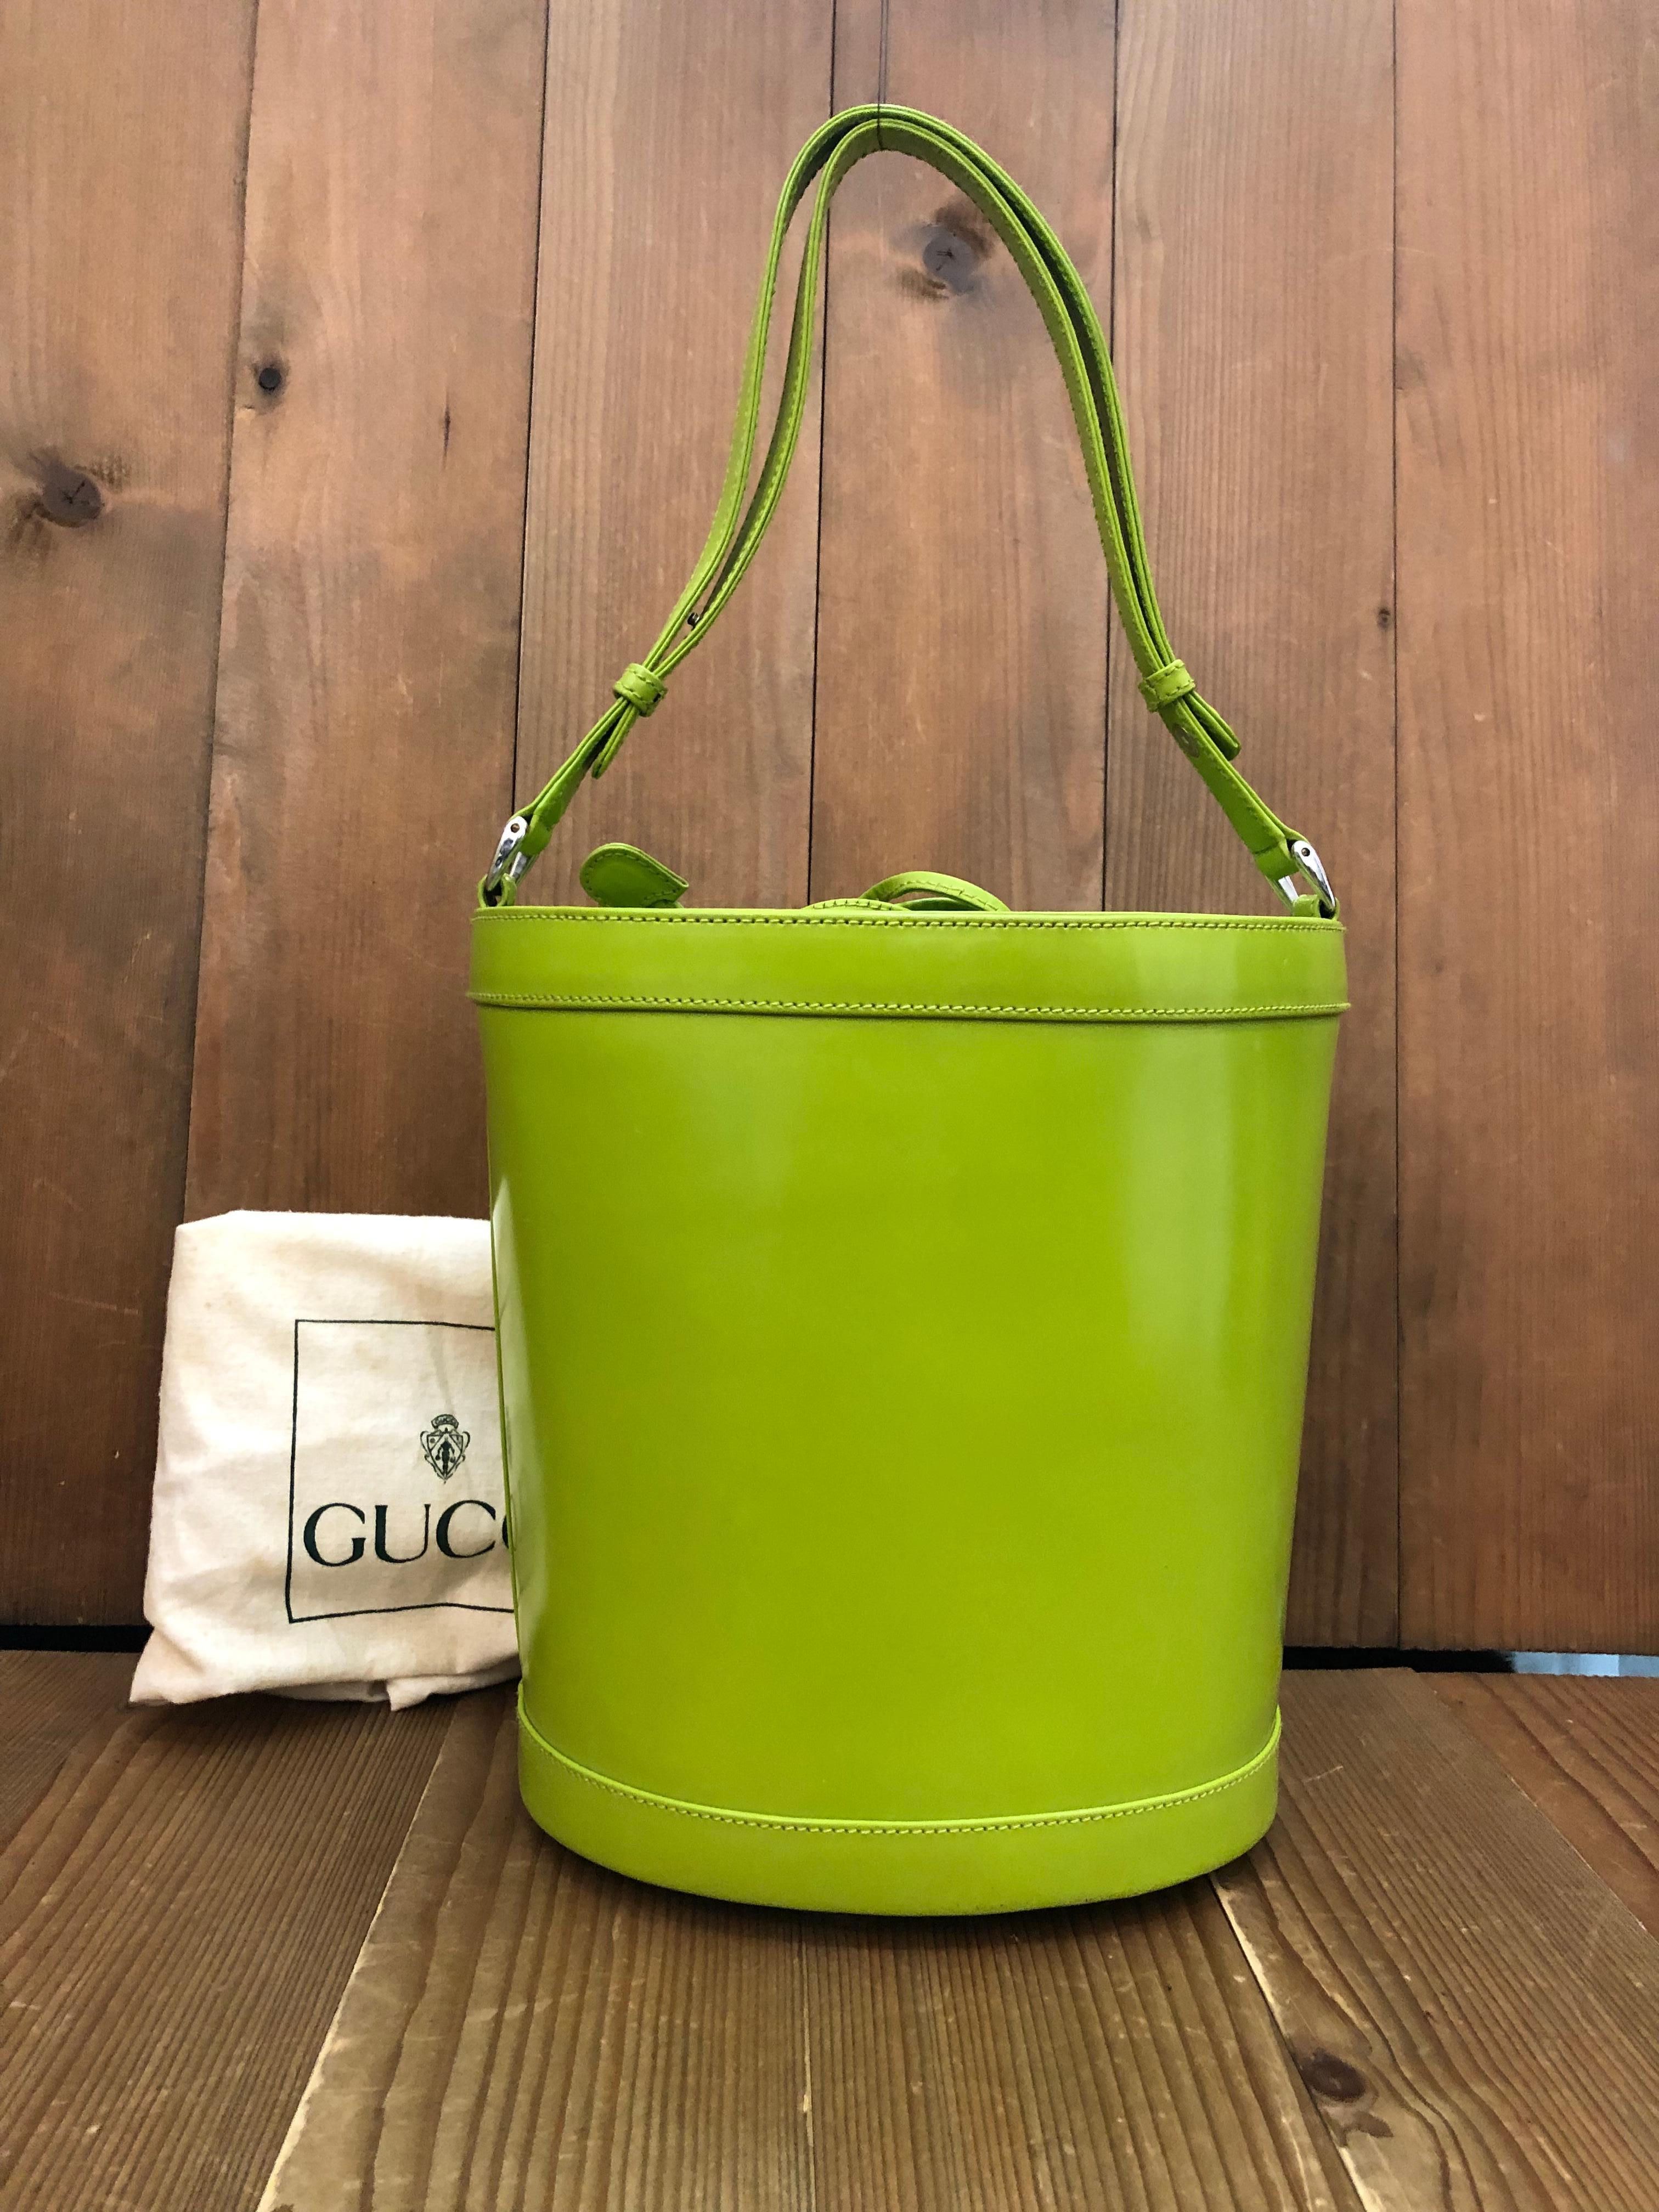 This vintage GUCCI 2-way bucket bag is crafted of smooth leather and nubuck leather in lime green. Top drawstring closure in nubuck leather opens to a coated interior which has been professionally cleaned featuring a zippered pocket. This Gucci